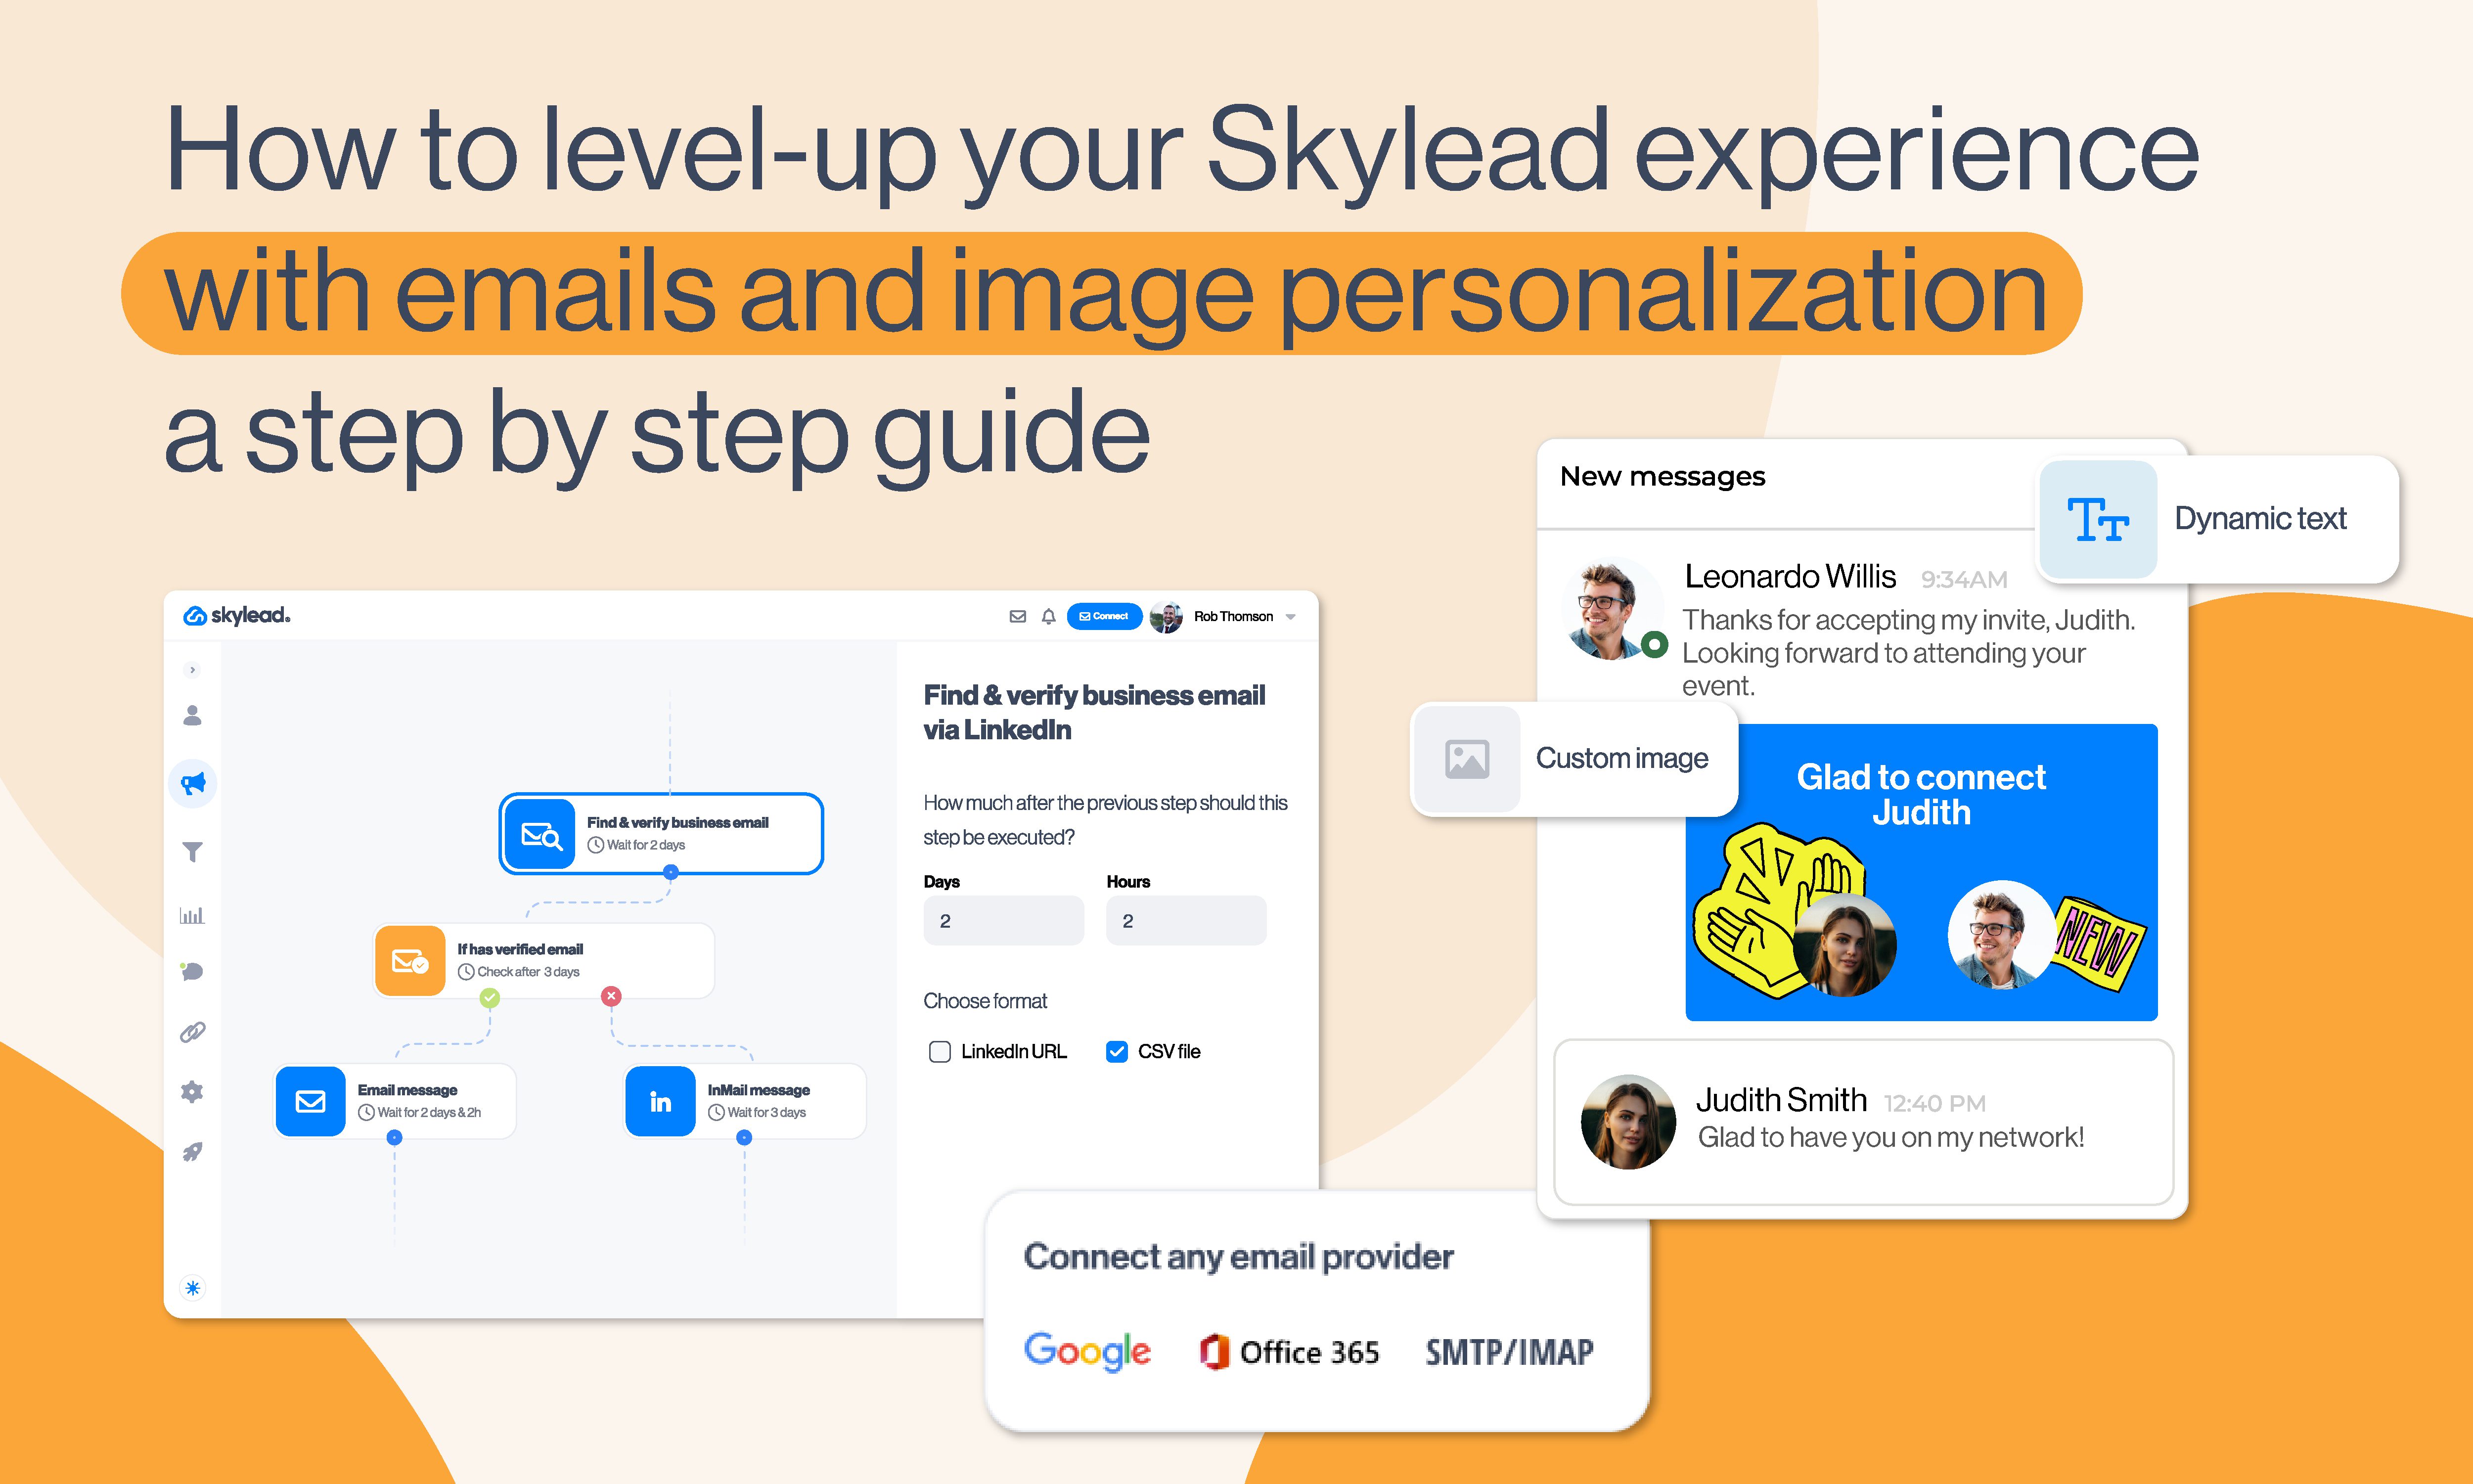 Level-up-your-Skylead-experience-with-emails-and-image-personalization-Cover-visual